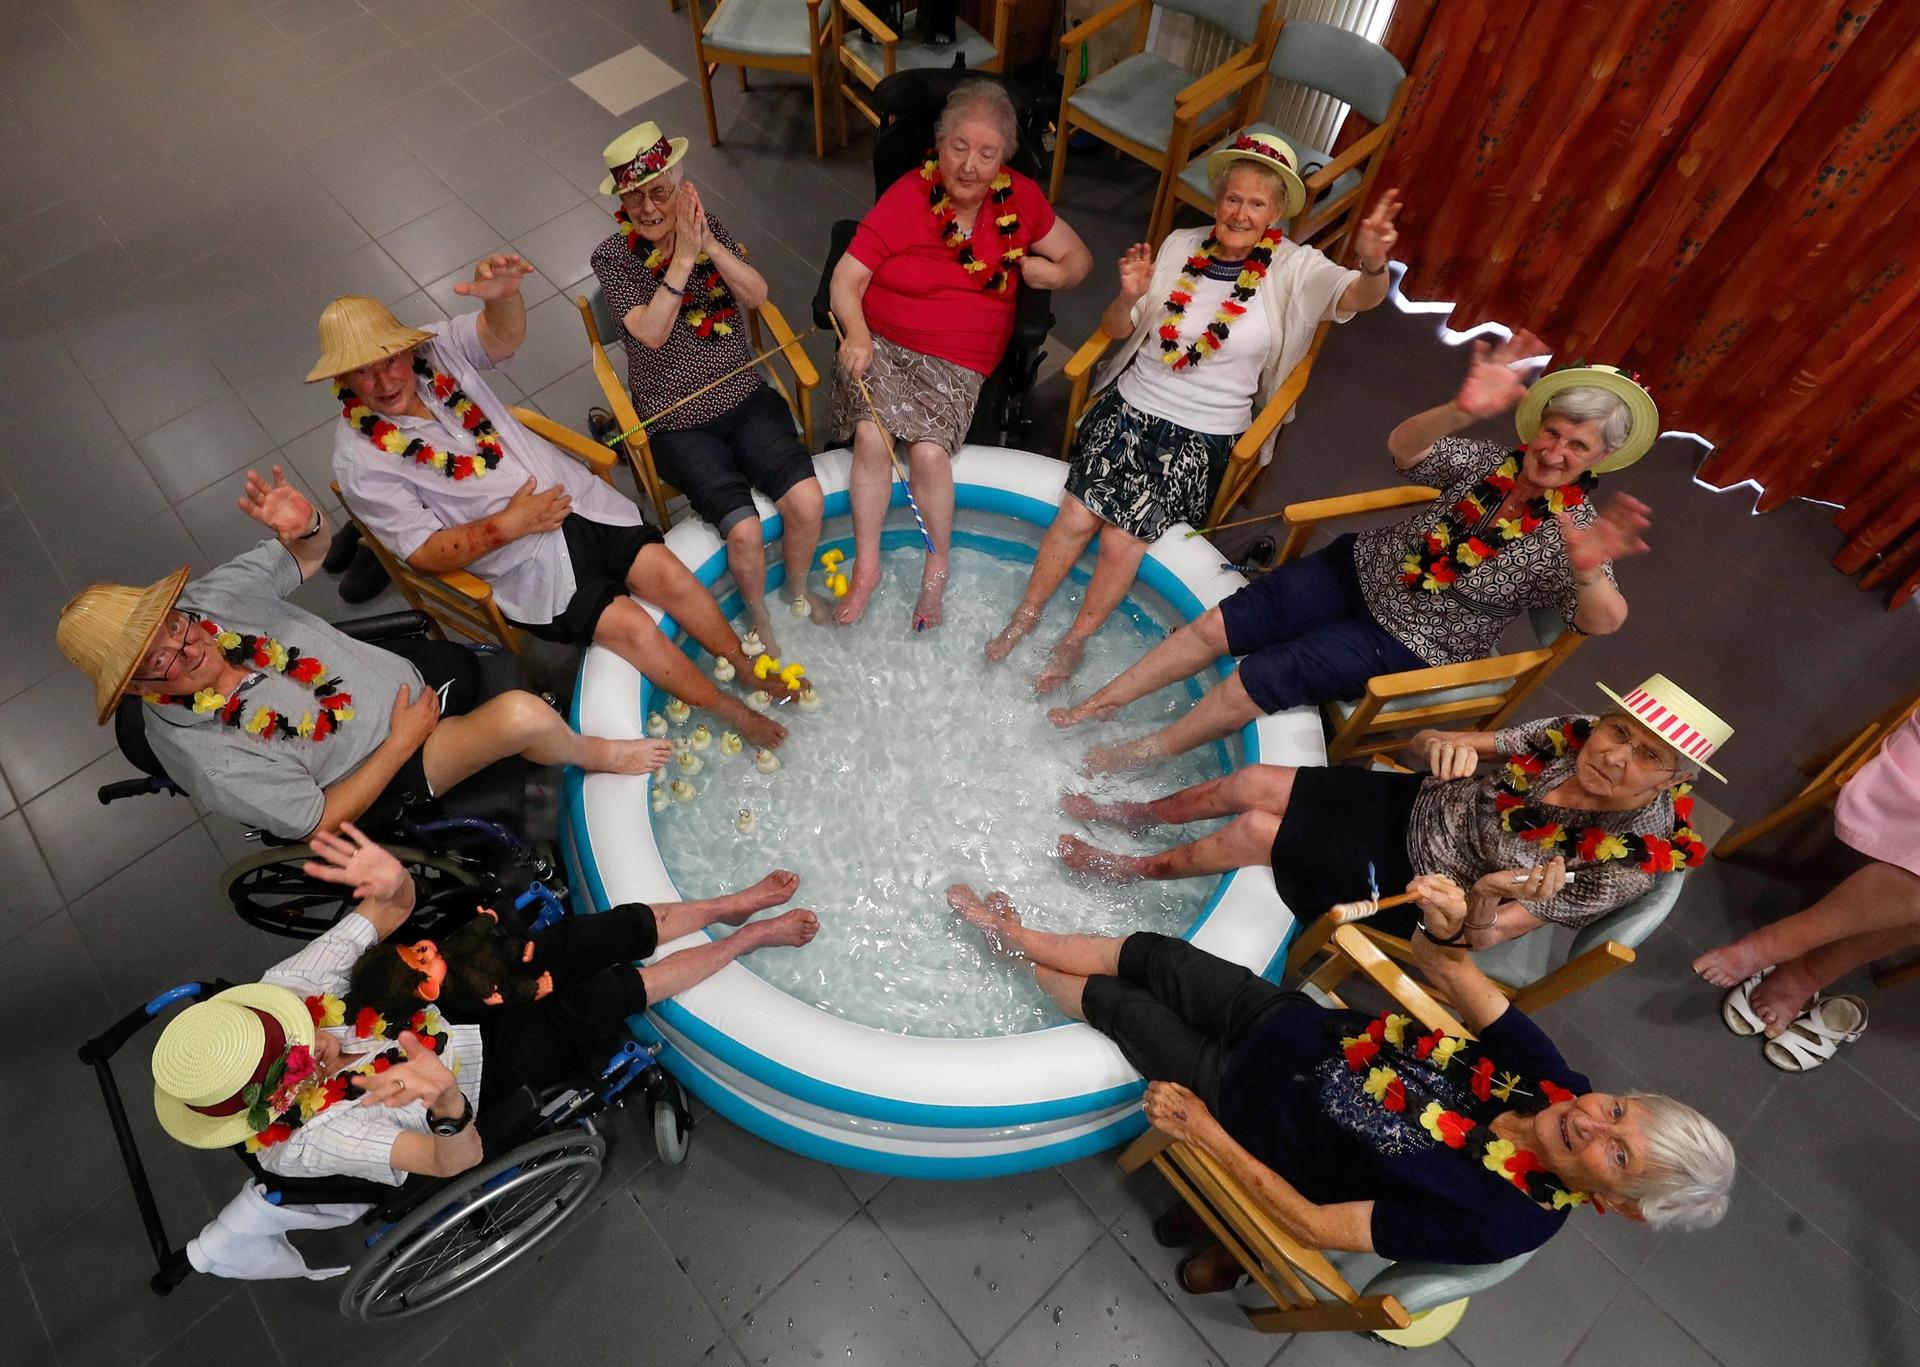 Residents at the Ter Biest house for elderly persons refresh their feet in a pool in this over-head photograph.